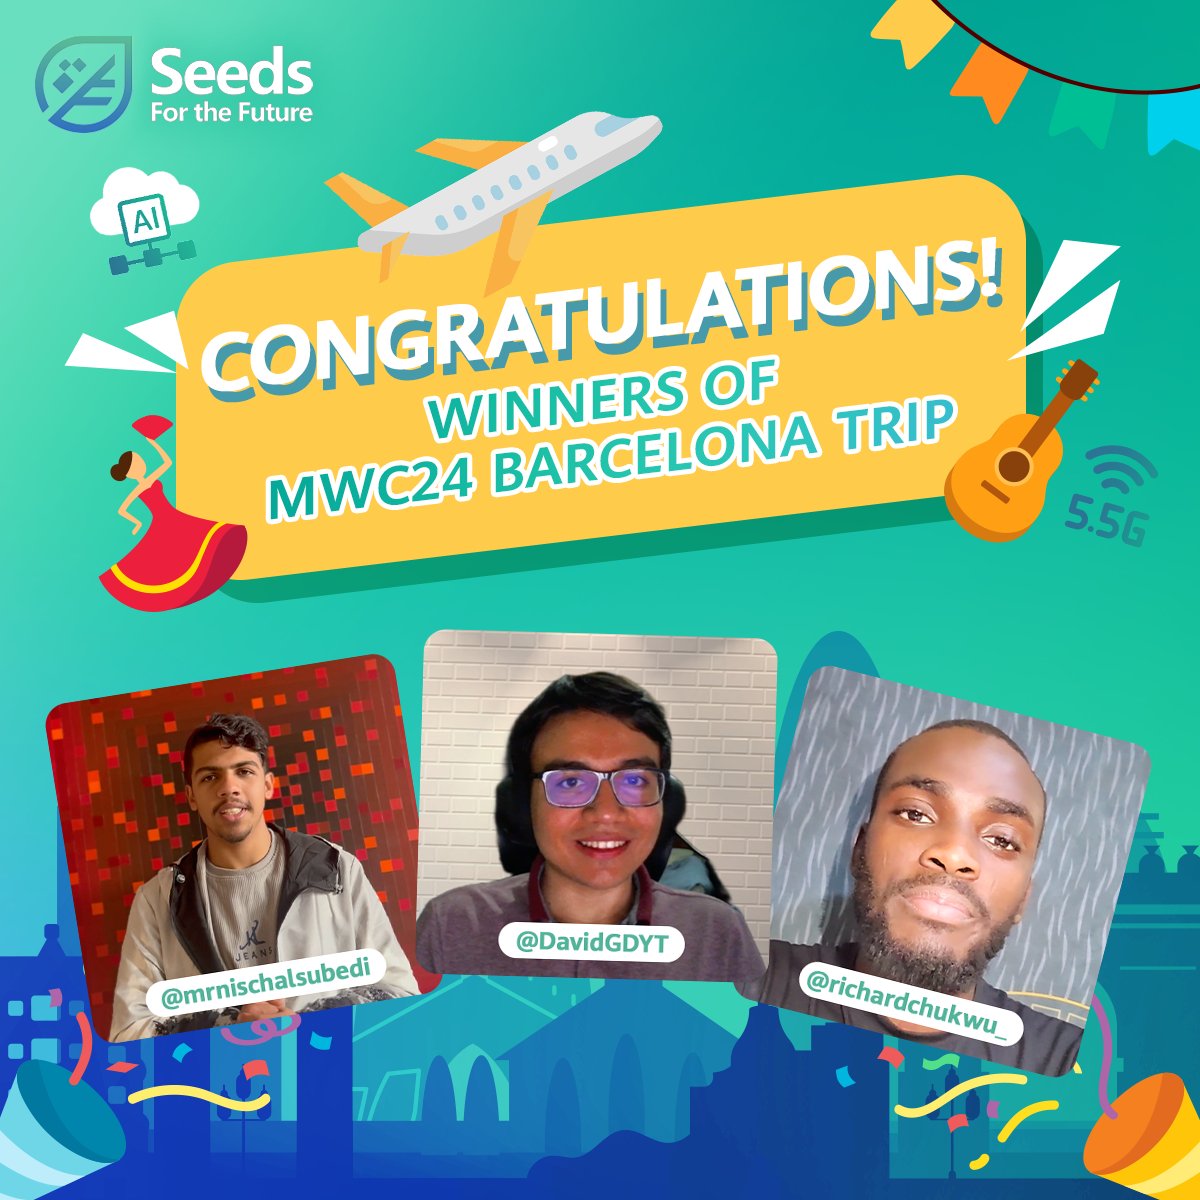 CONGRATULATIONS to the winners of a free trip to #MWC24 in Barcelona! Thank you to everyone who participated in the competition — stay tuned for more amazing #Huawei giveaways! #BetterTogether #SeedsForTheFuture #SeedsTourMWC24